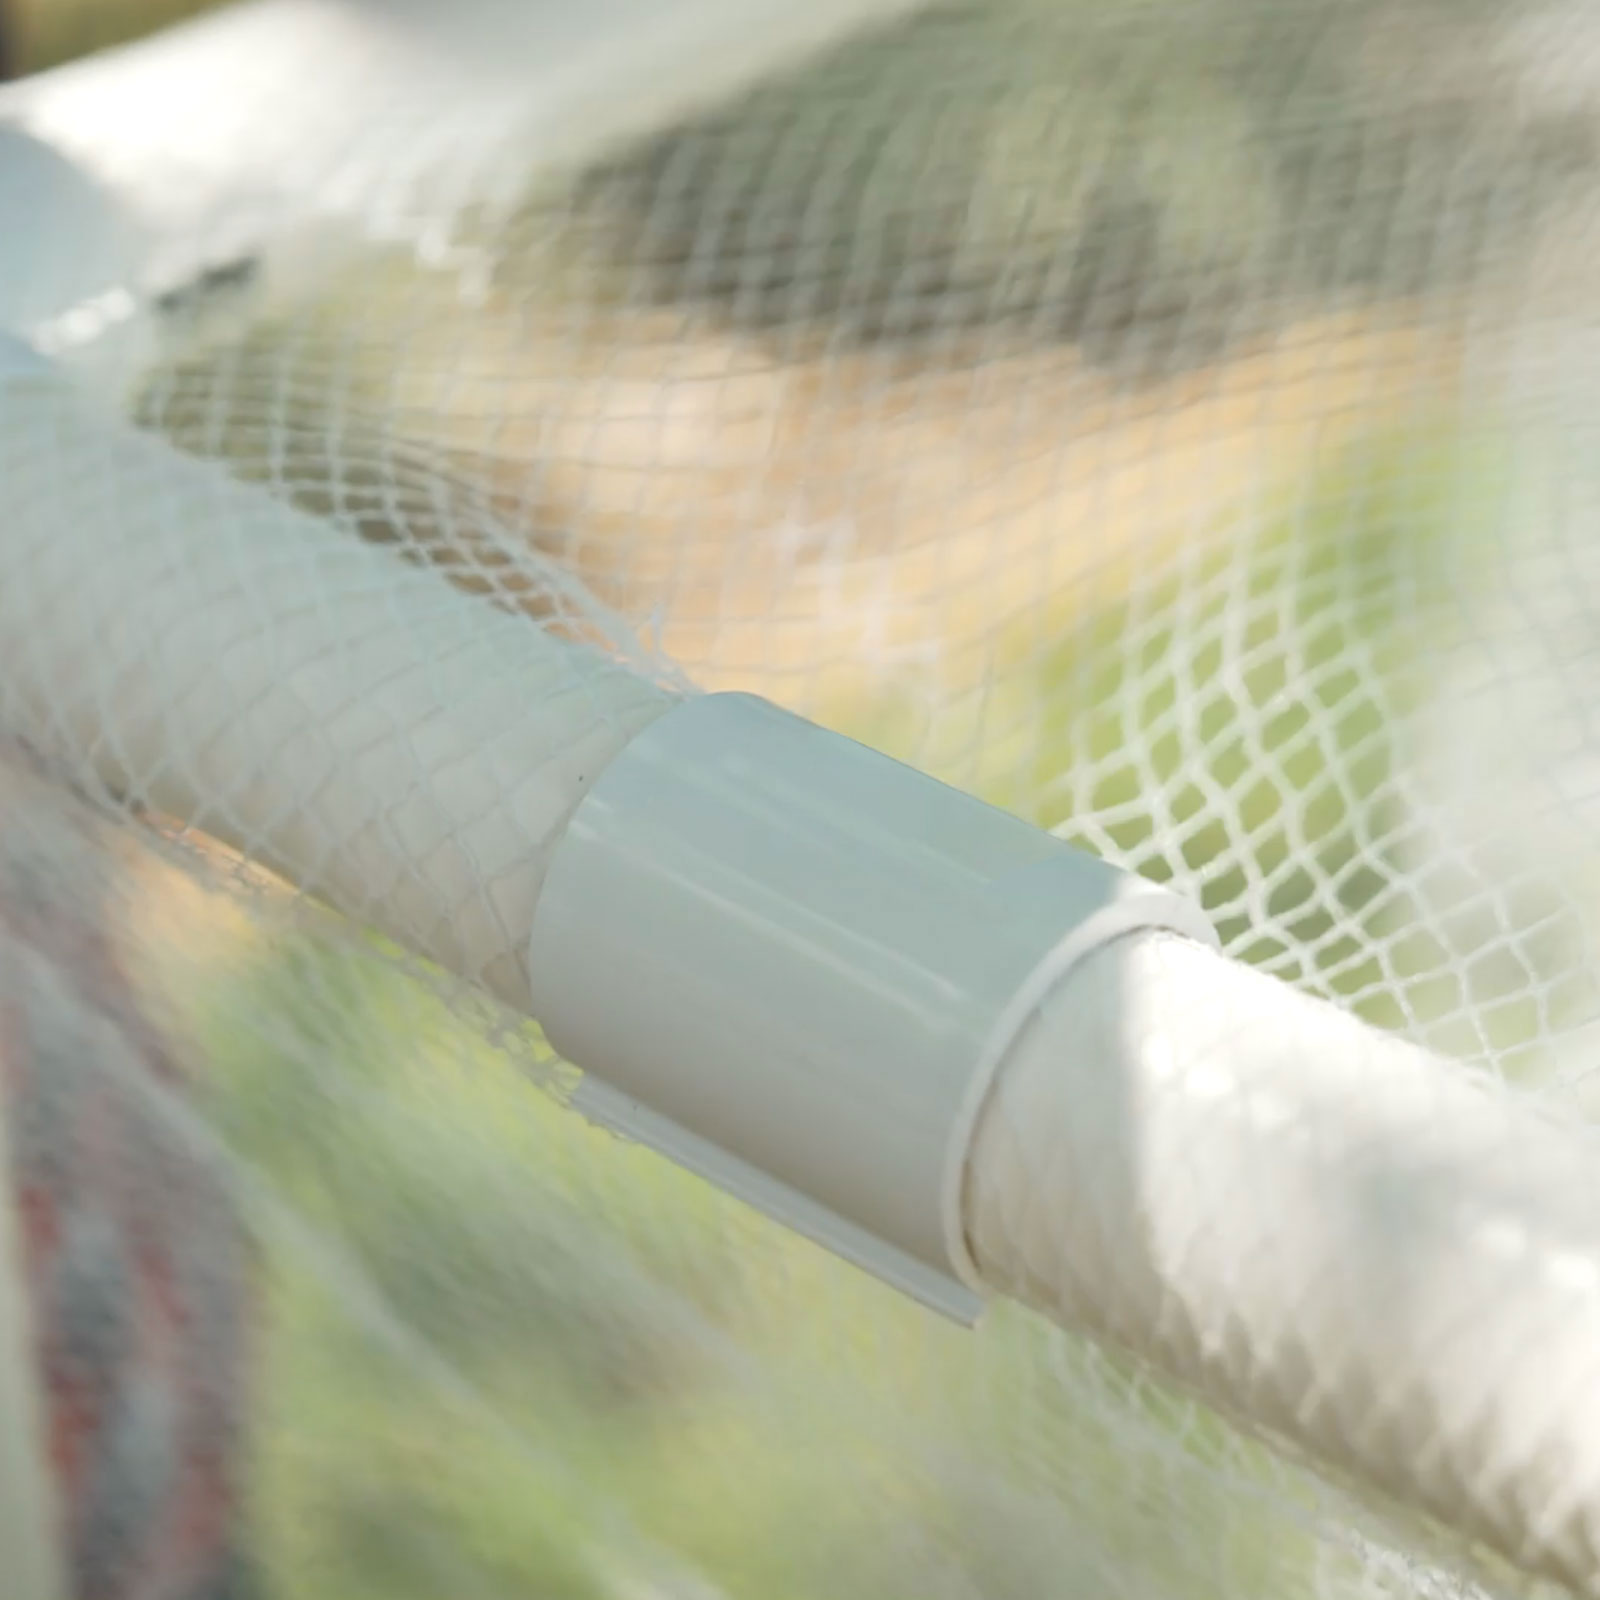 Ezyfit snap-on clamp fitted over frame and netting. Holding garden netting firmly in place over PVC pipe frame.